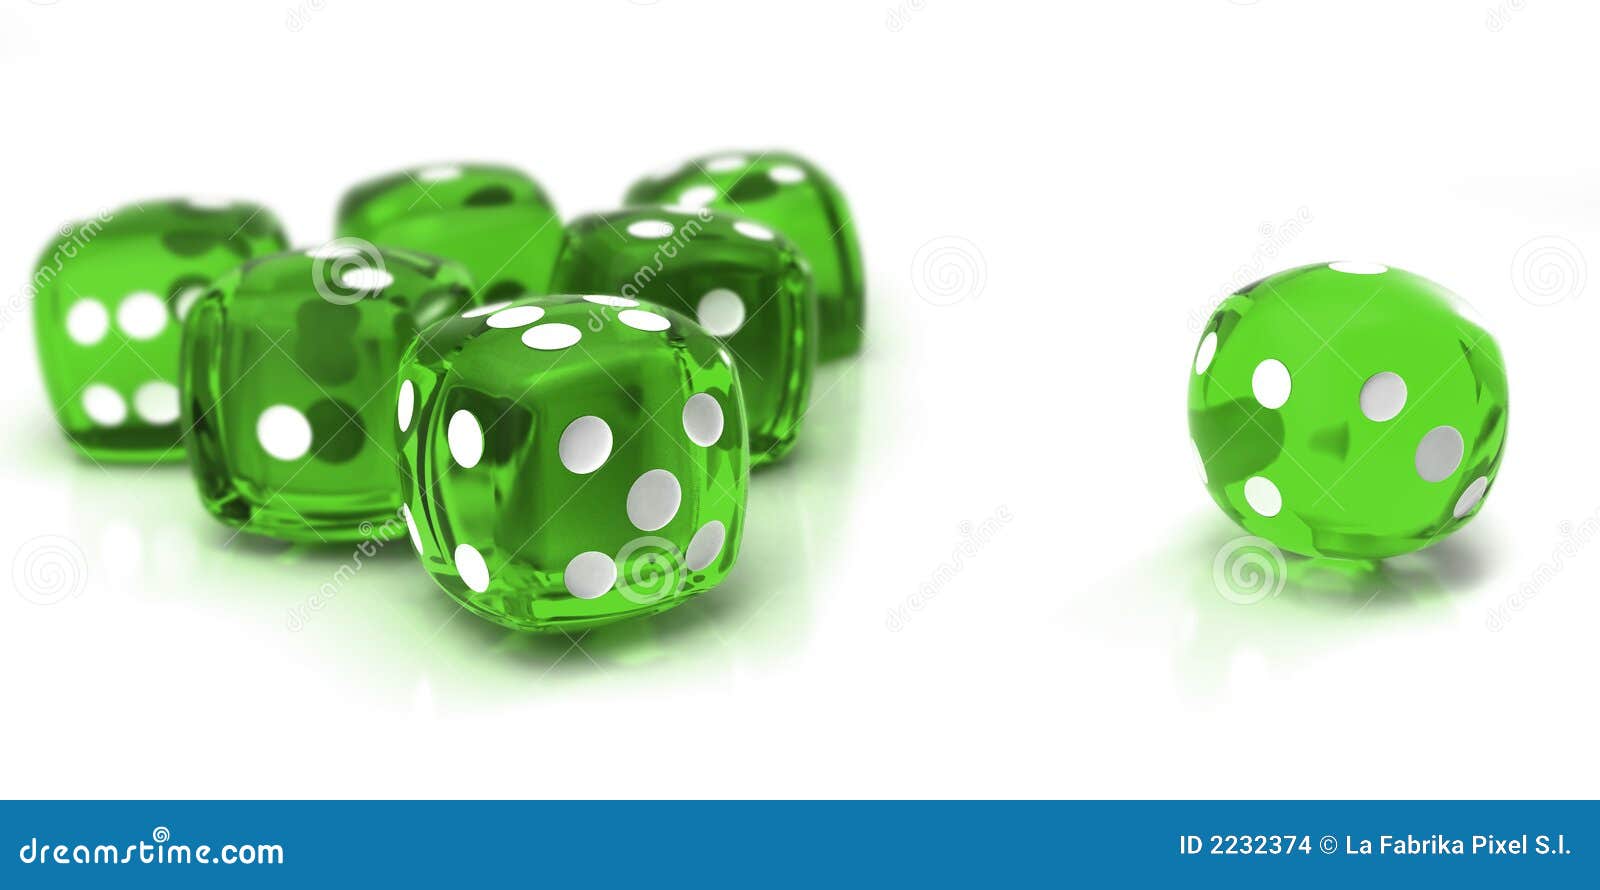 green dice clipart - photo #37